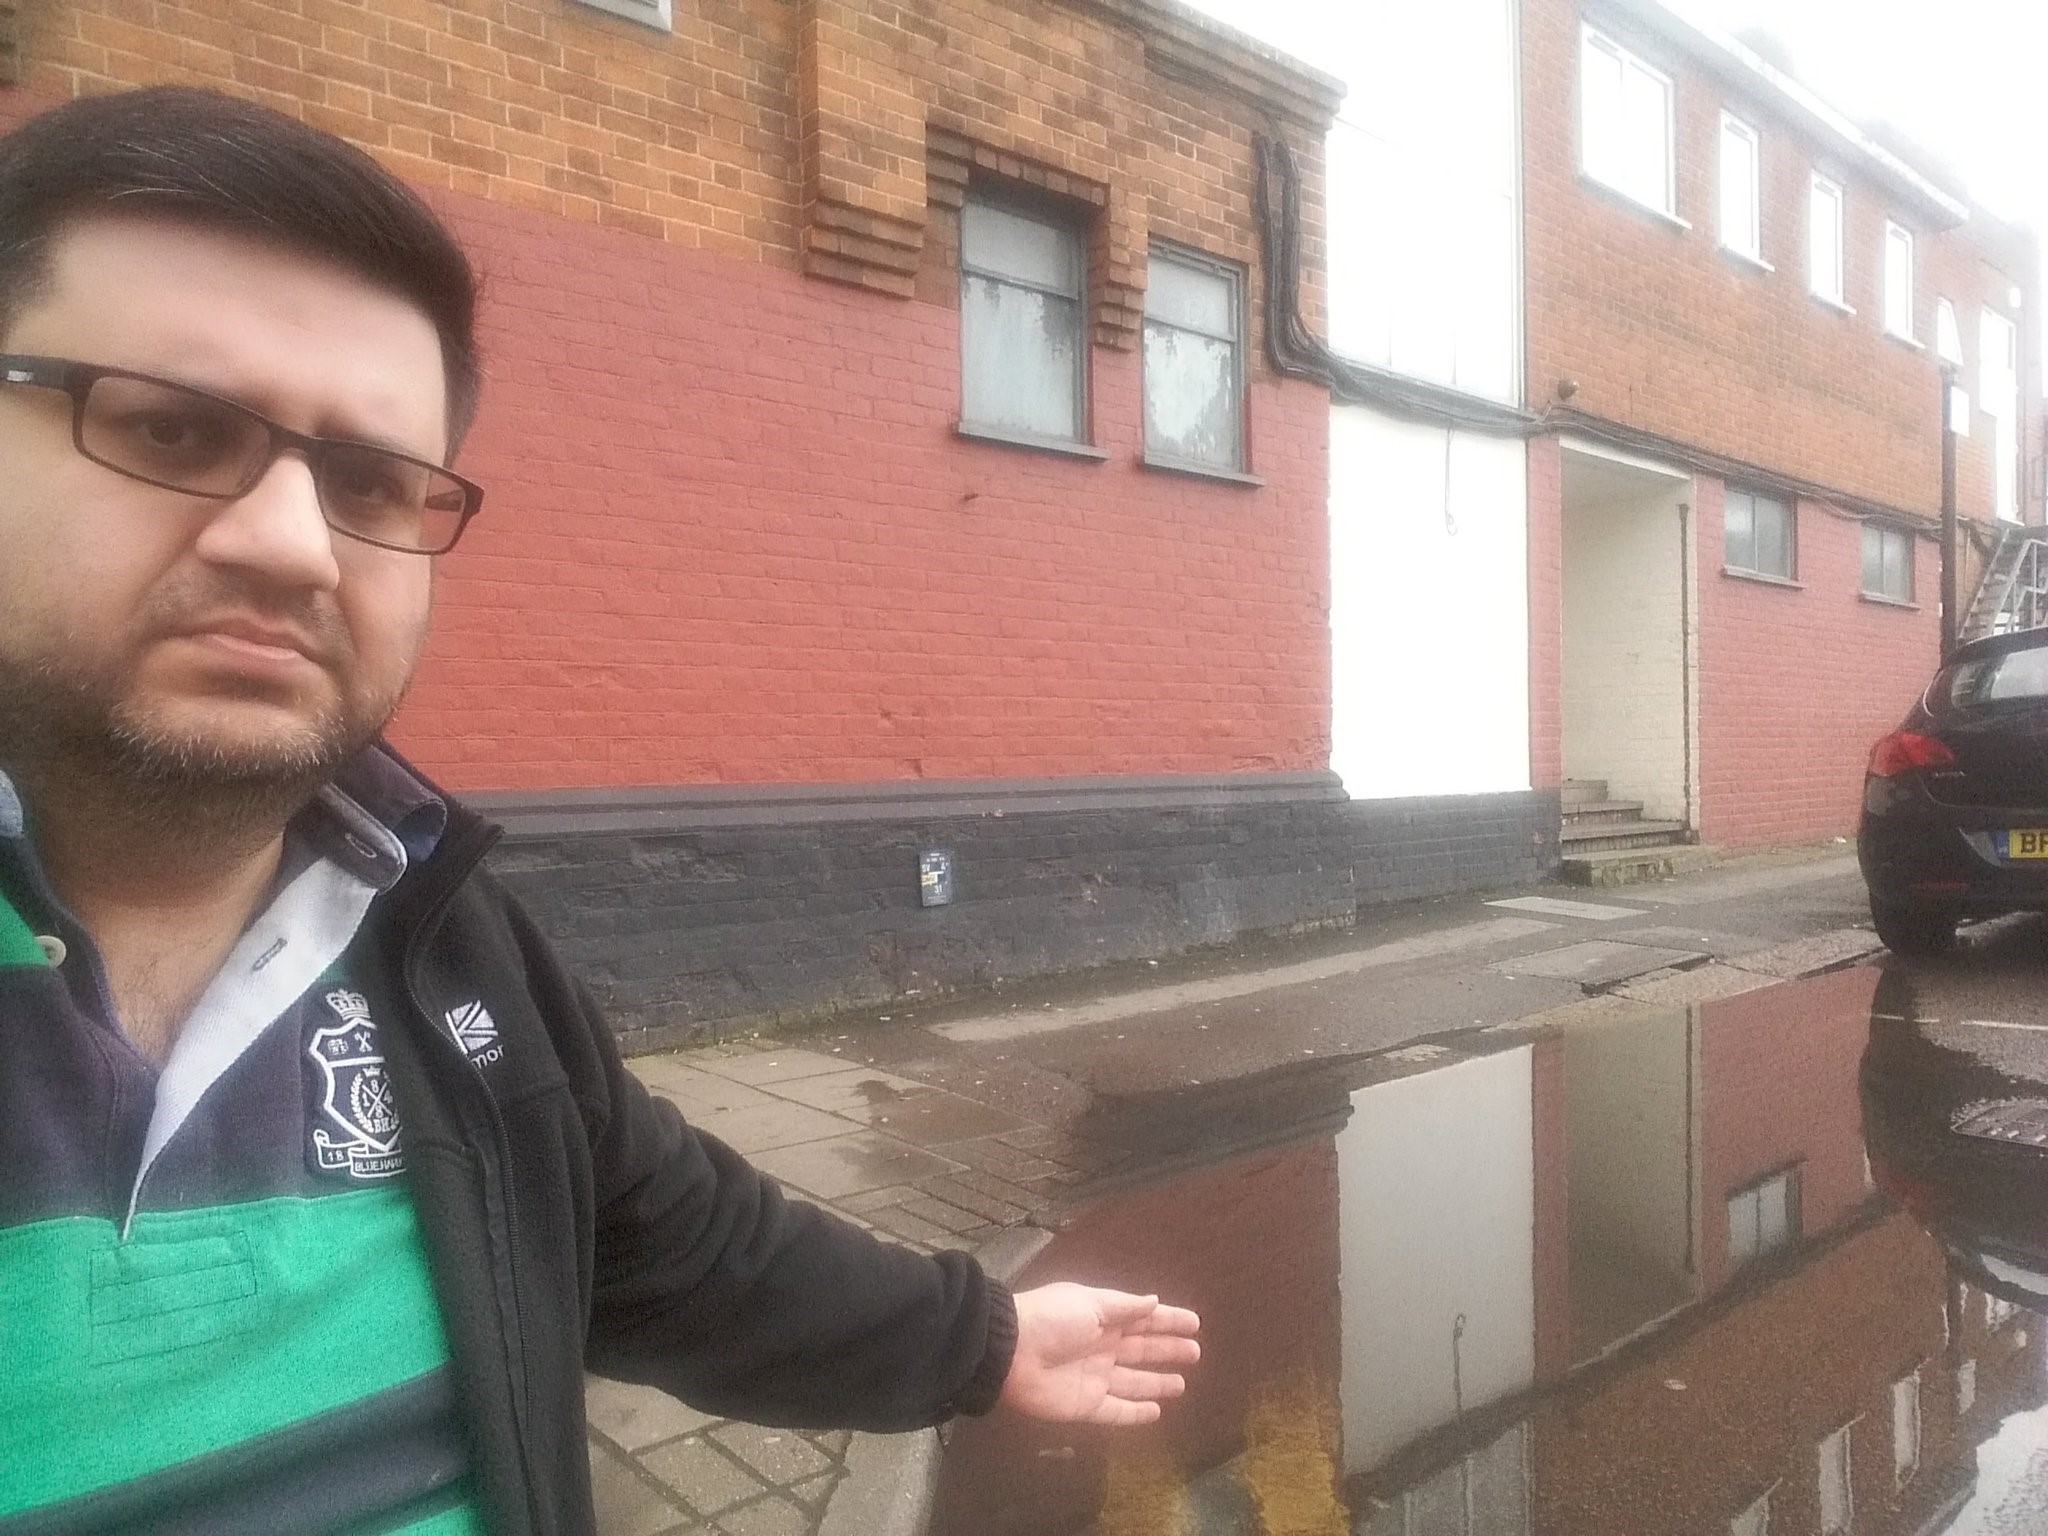 Cllr Khan pictured at the site in question before the pandemic, with flooding still an issue now